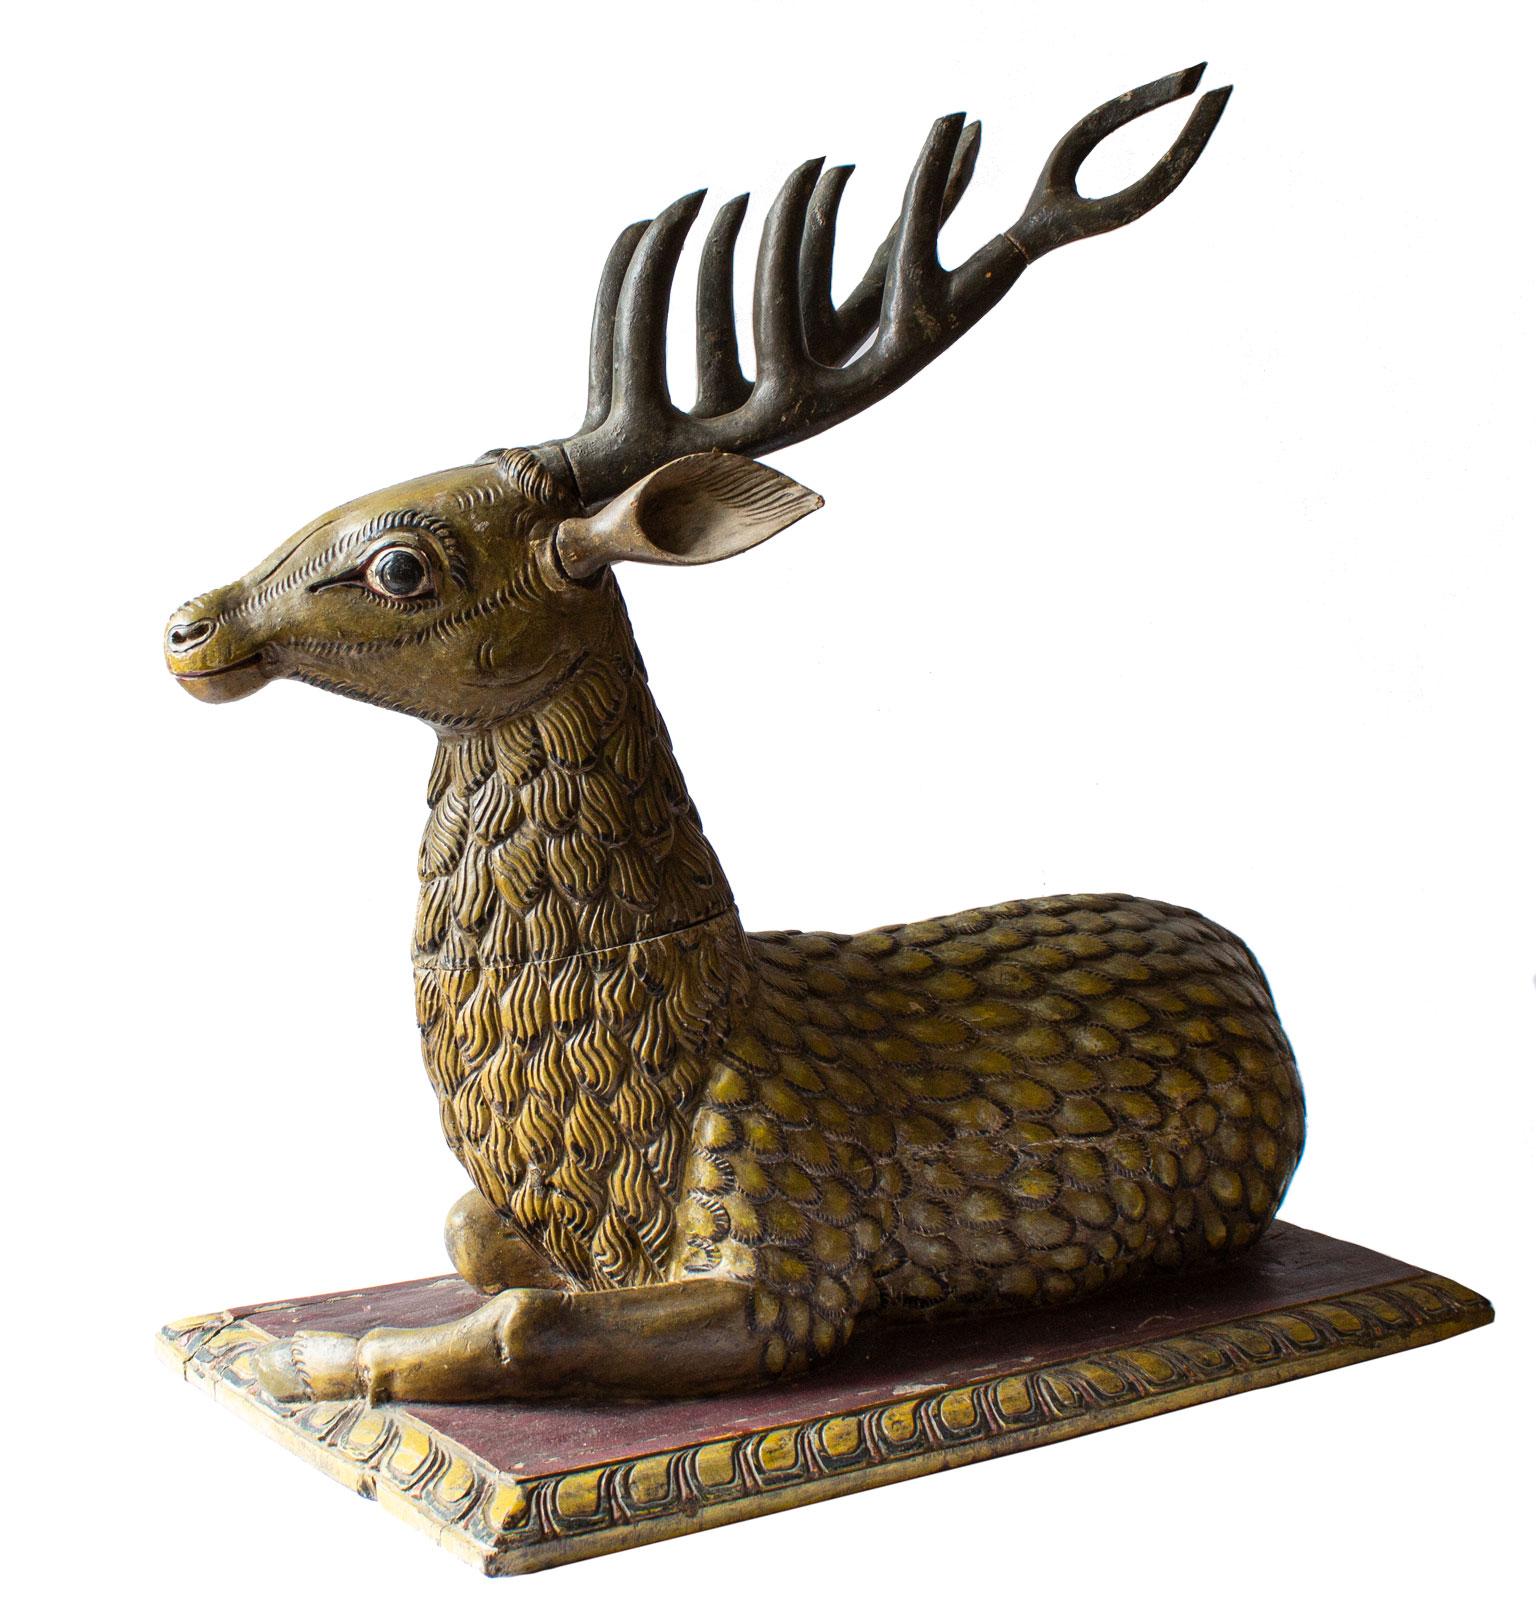 Swedish Big Hand Carved Painted Stag Sculpture in Wood, Early 1800th Century